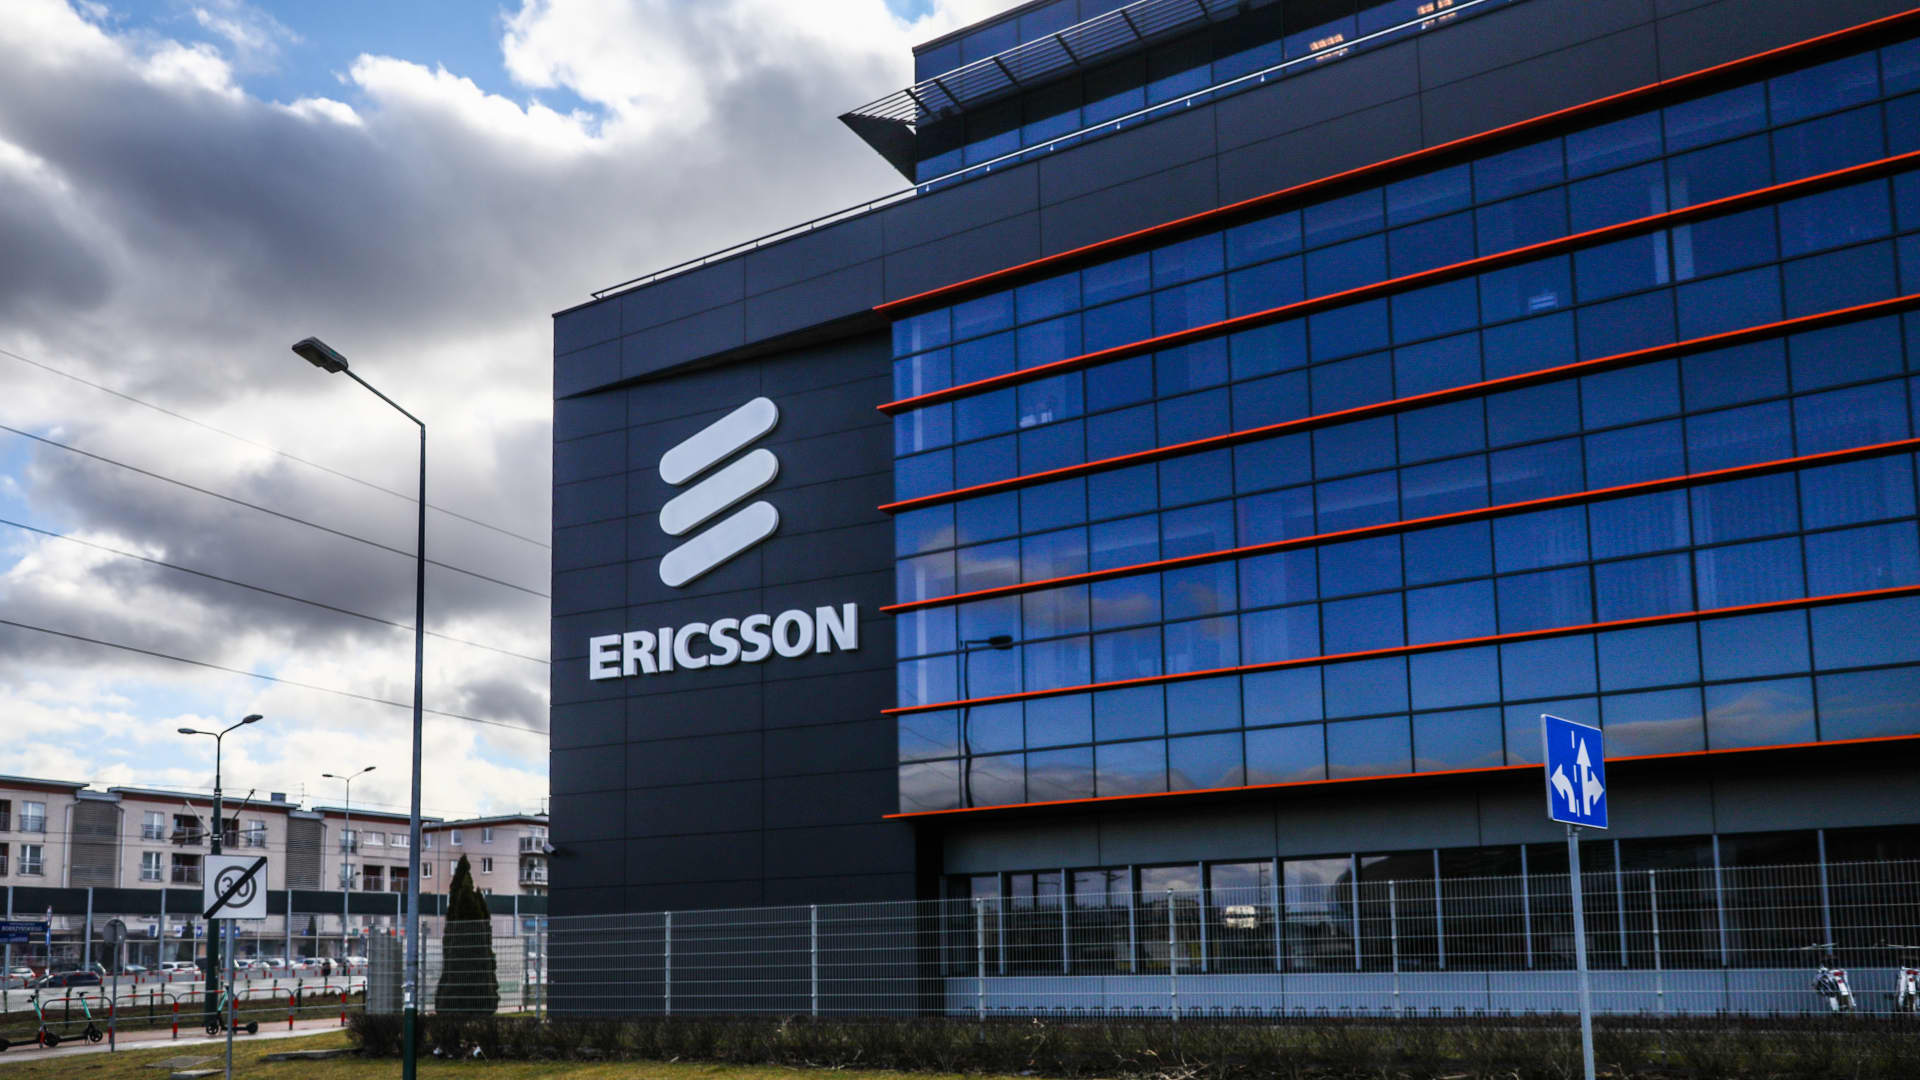 Ericsson to pay $206 million fine, plead guilty to bribery violations